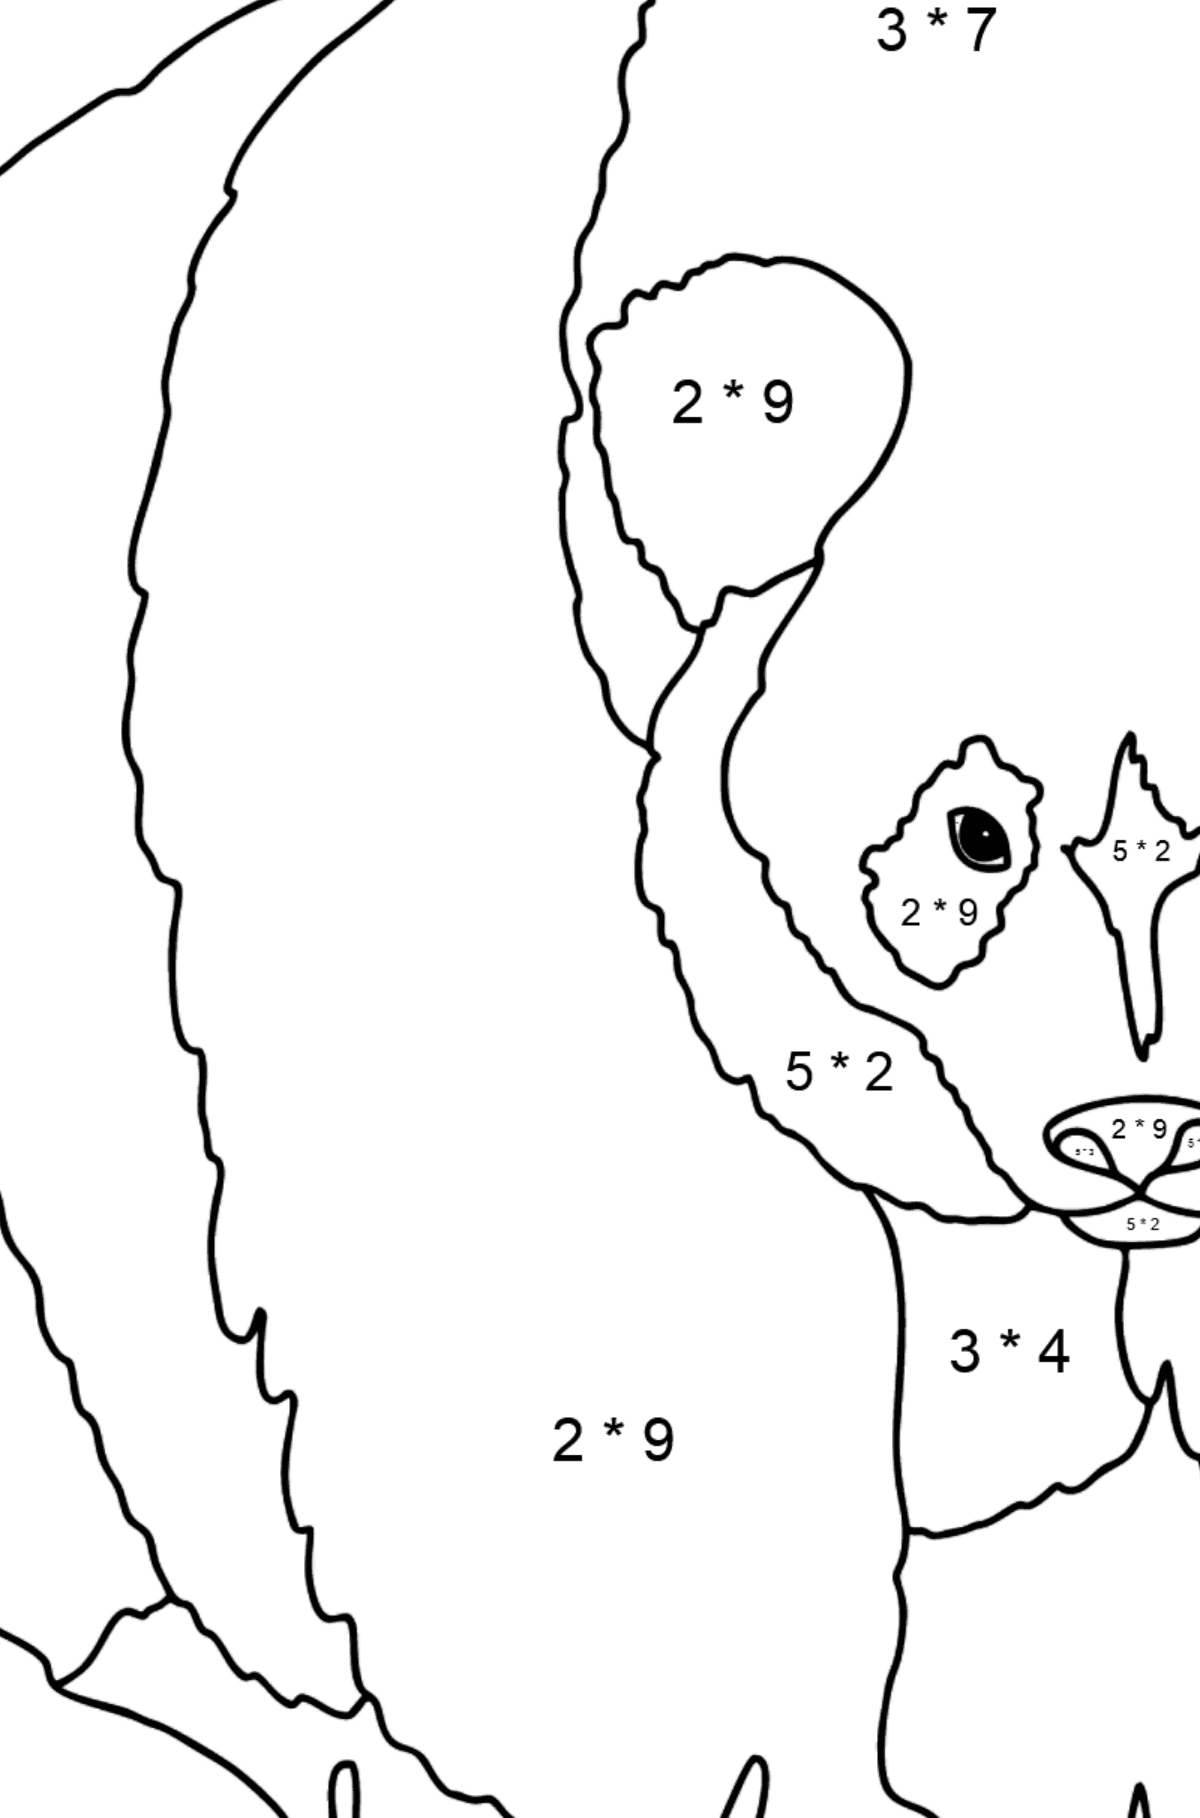 Coloring Page - A Panda is Preparing for Defense - Math Coloring - Multiplication for Kids